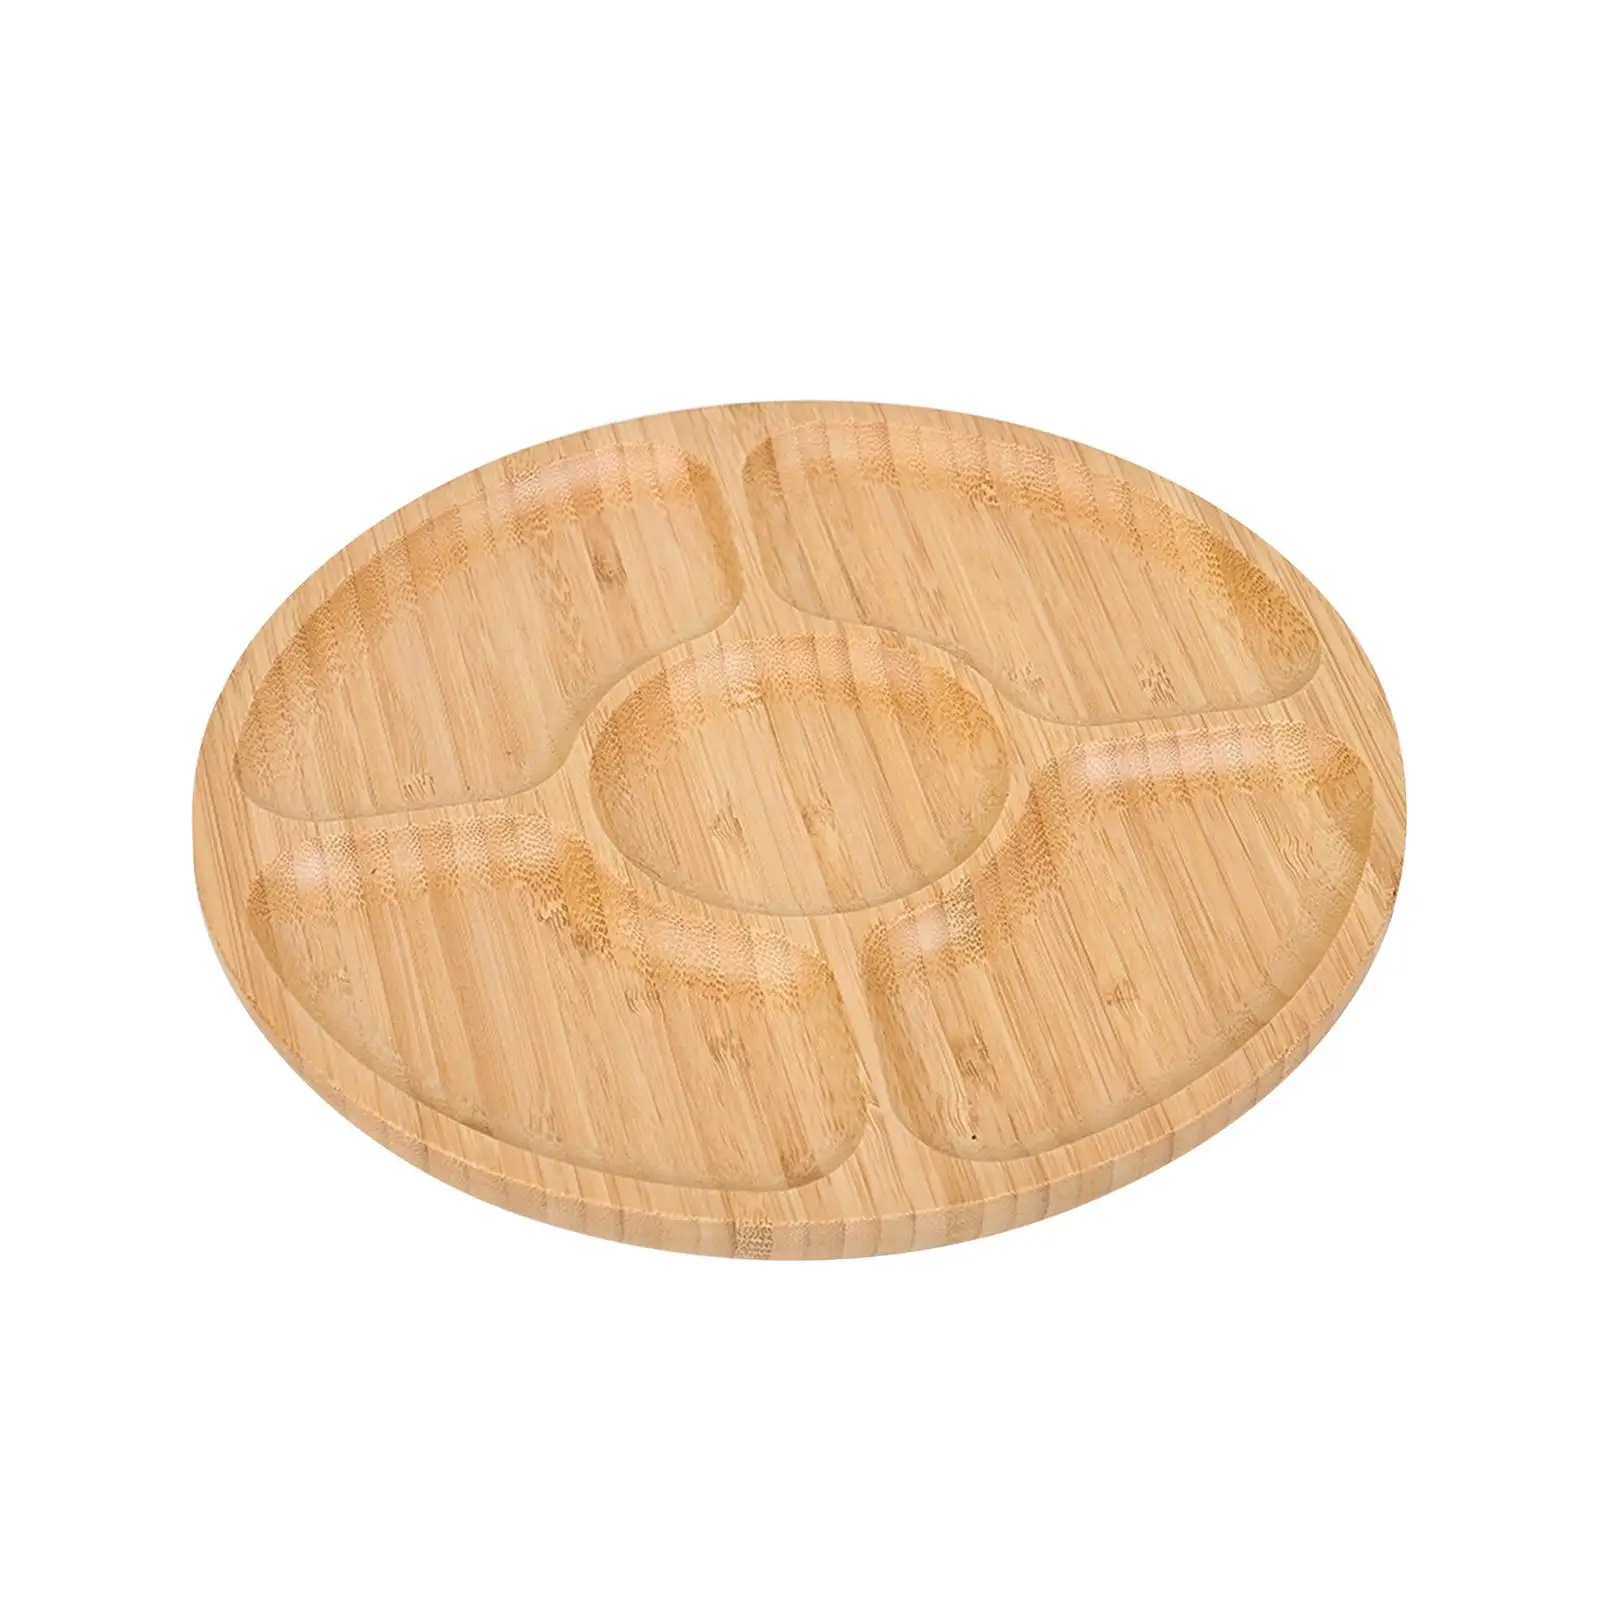 Wooden Tray Decorative Display Sectional Wooden Trays Wood Serving Platter Fruit Plate for Dinner Bread Wedding Cheese Vegetable